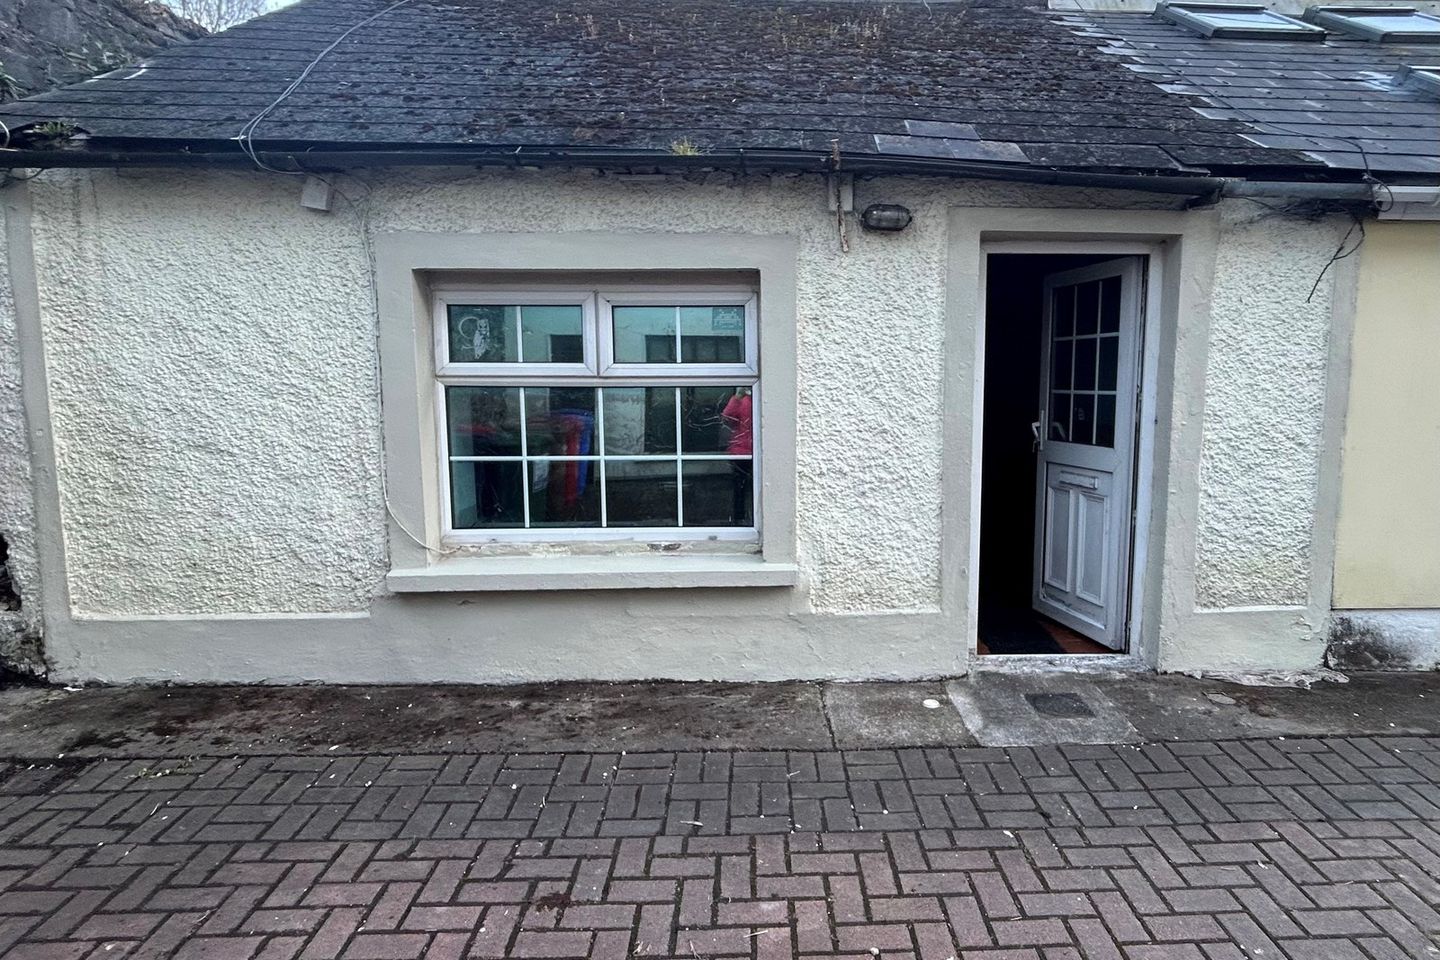 1 Railway Cottages, Anglesea Street, Cork City, Co. Cork, T12YYD6